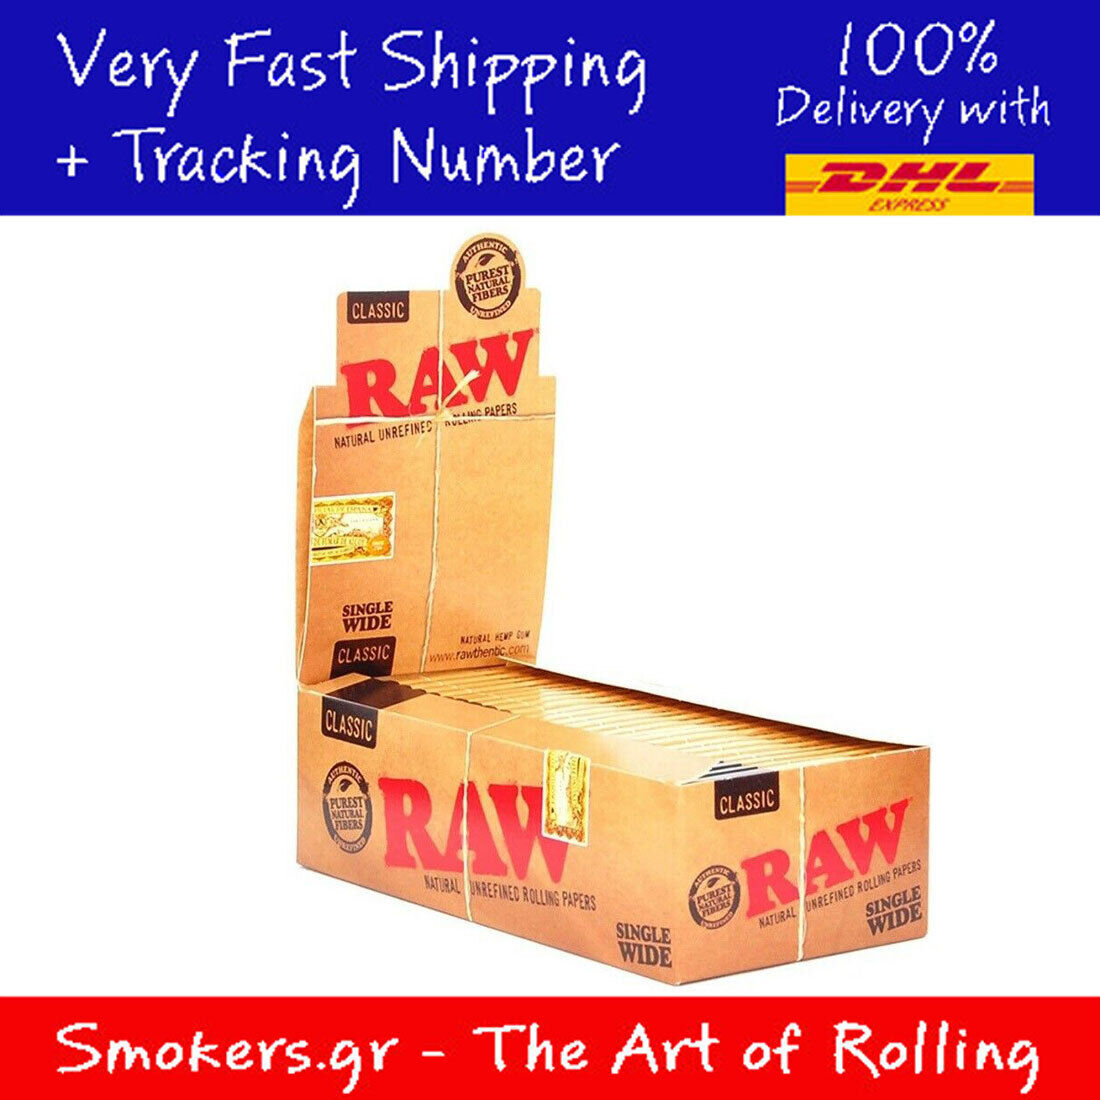 1 x Box Raw Classic Natural Unrefined Rolling Papers ( 50 Booklets in Box )